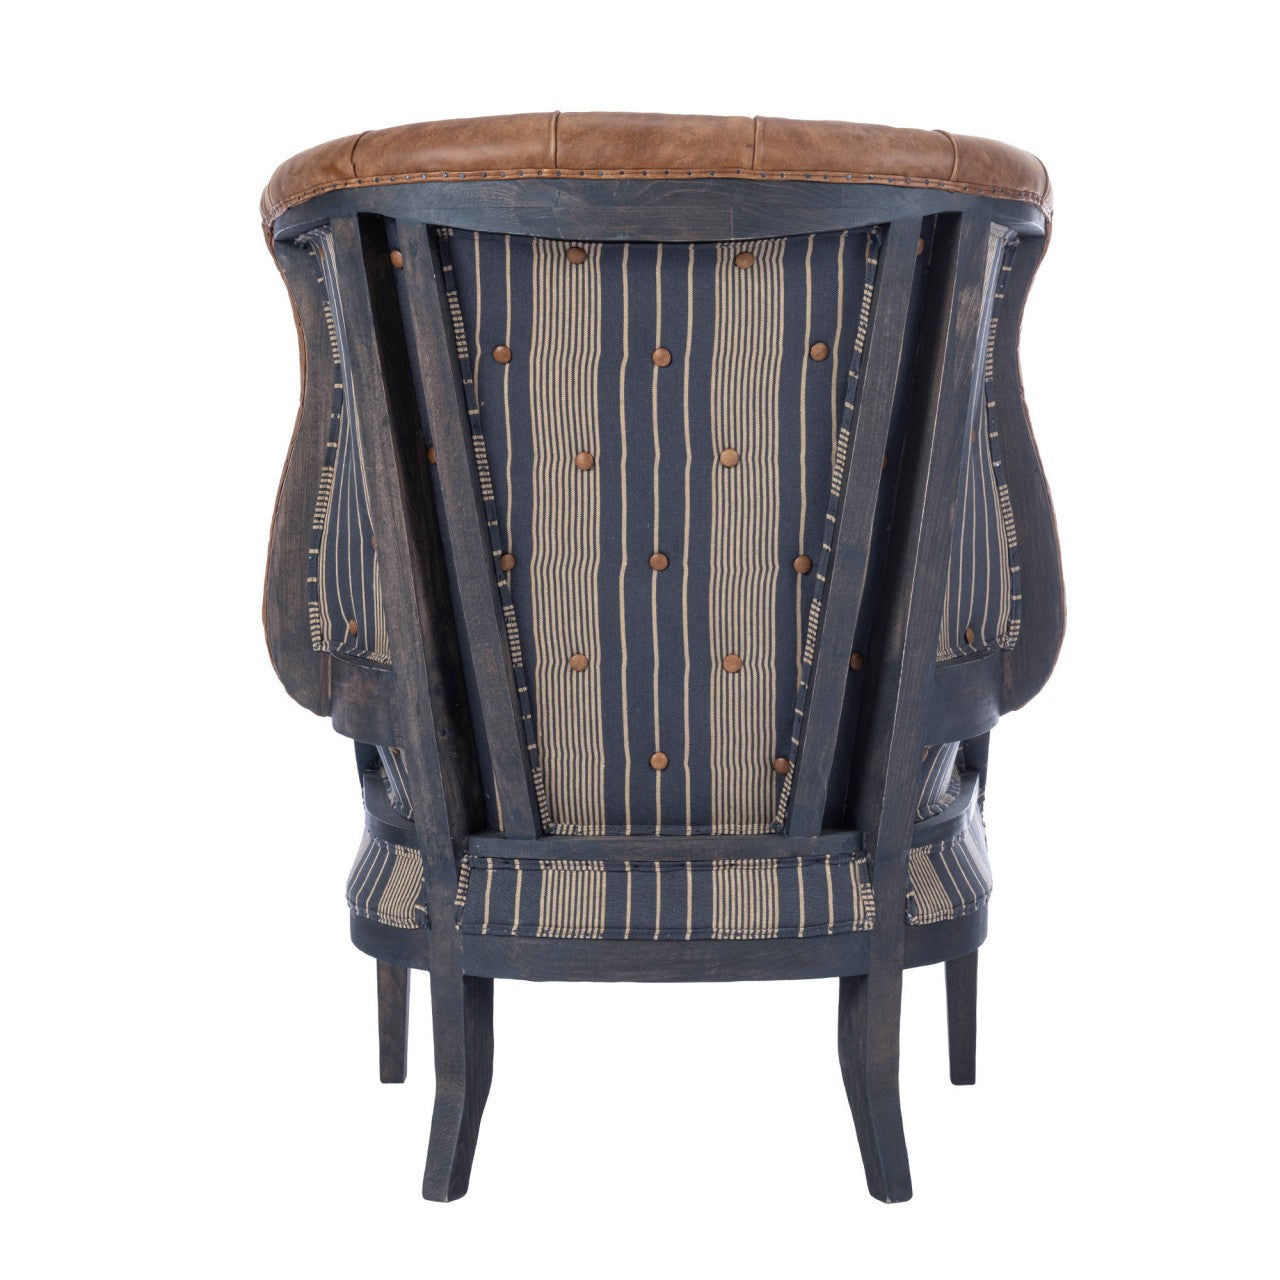 WILLIAM DECONSTRUCTED WING CHAIR (Leather) - NEWPORT STRIPES Heavy Linen Fabric_Furniture_Mindthegap